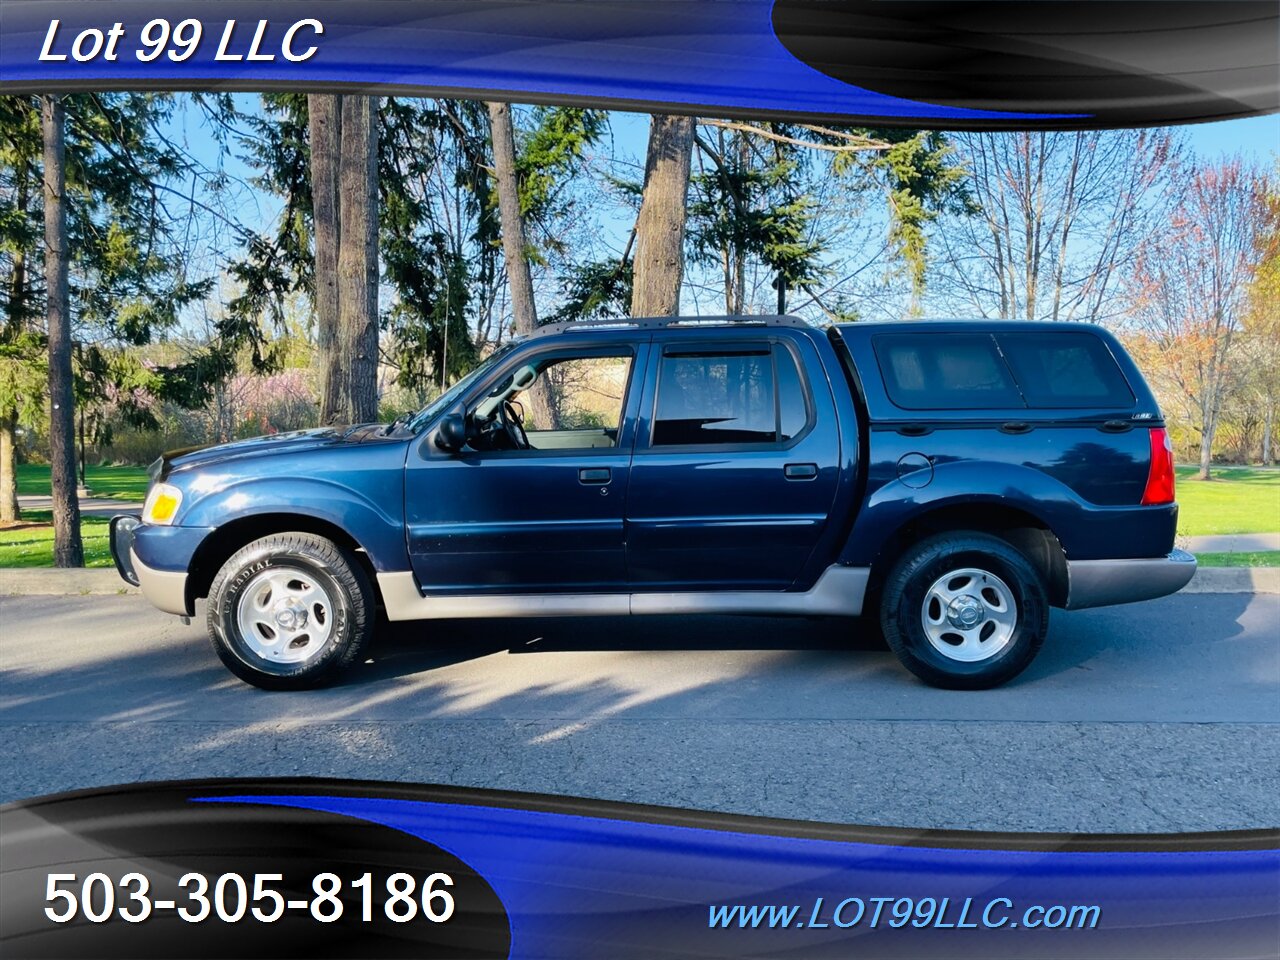 2003 Ford Explorer Sport Trac XLS 4x4  1-OWNER 117k  NEW TIRES  Canopy   - Photo 1 - Milwaukie, OR 97267